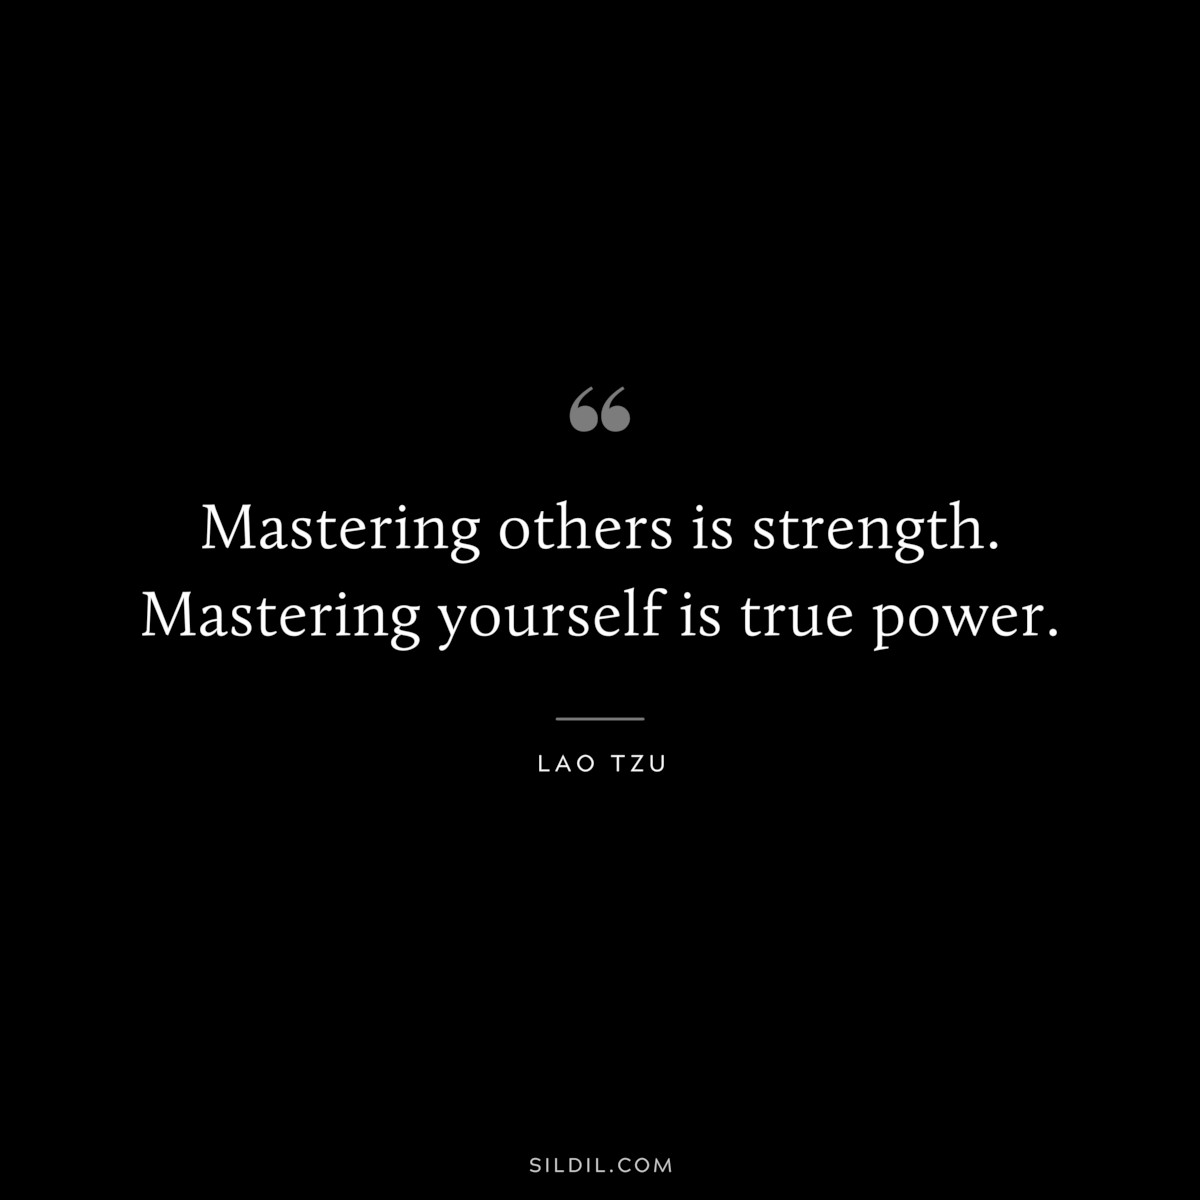 Mastering others is strength. Mastering yourself is true power. ― Lao Tzu